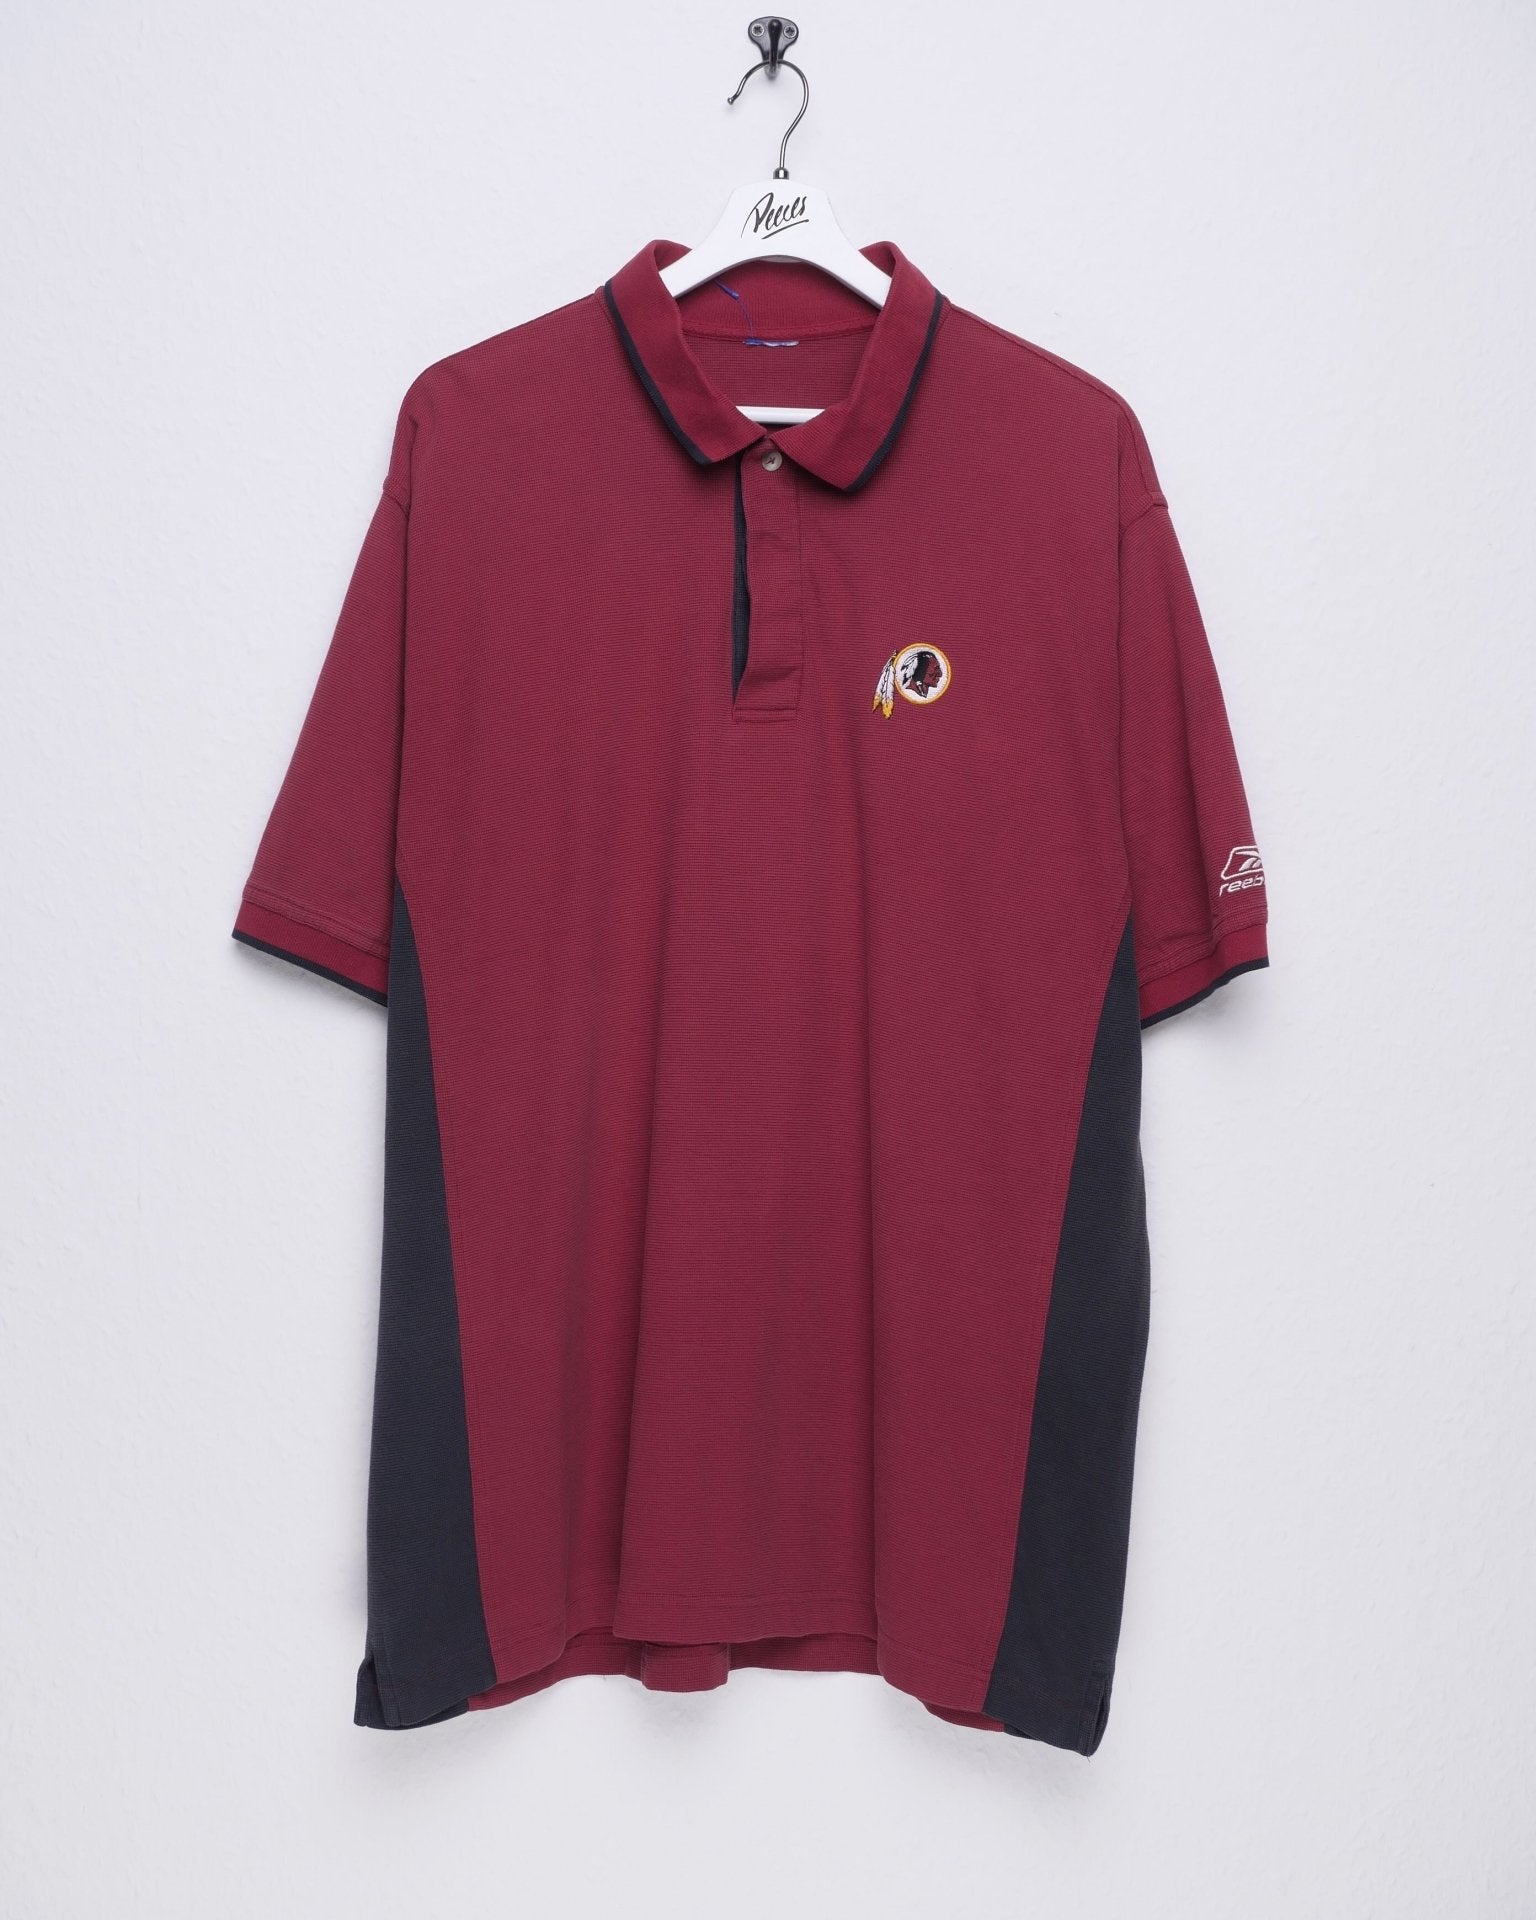 Washington Redskins embroidered Half buttoned Down Shirt - Peeces